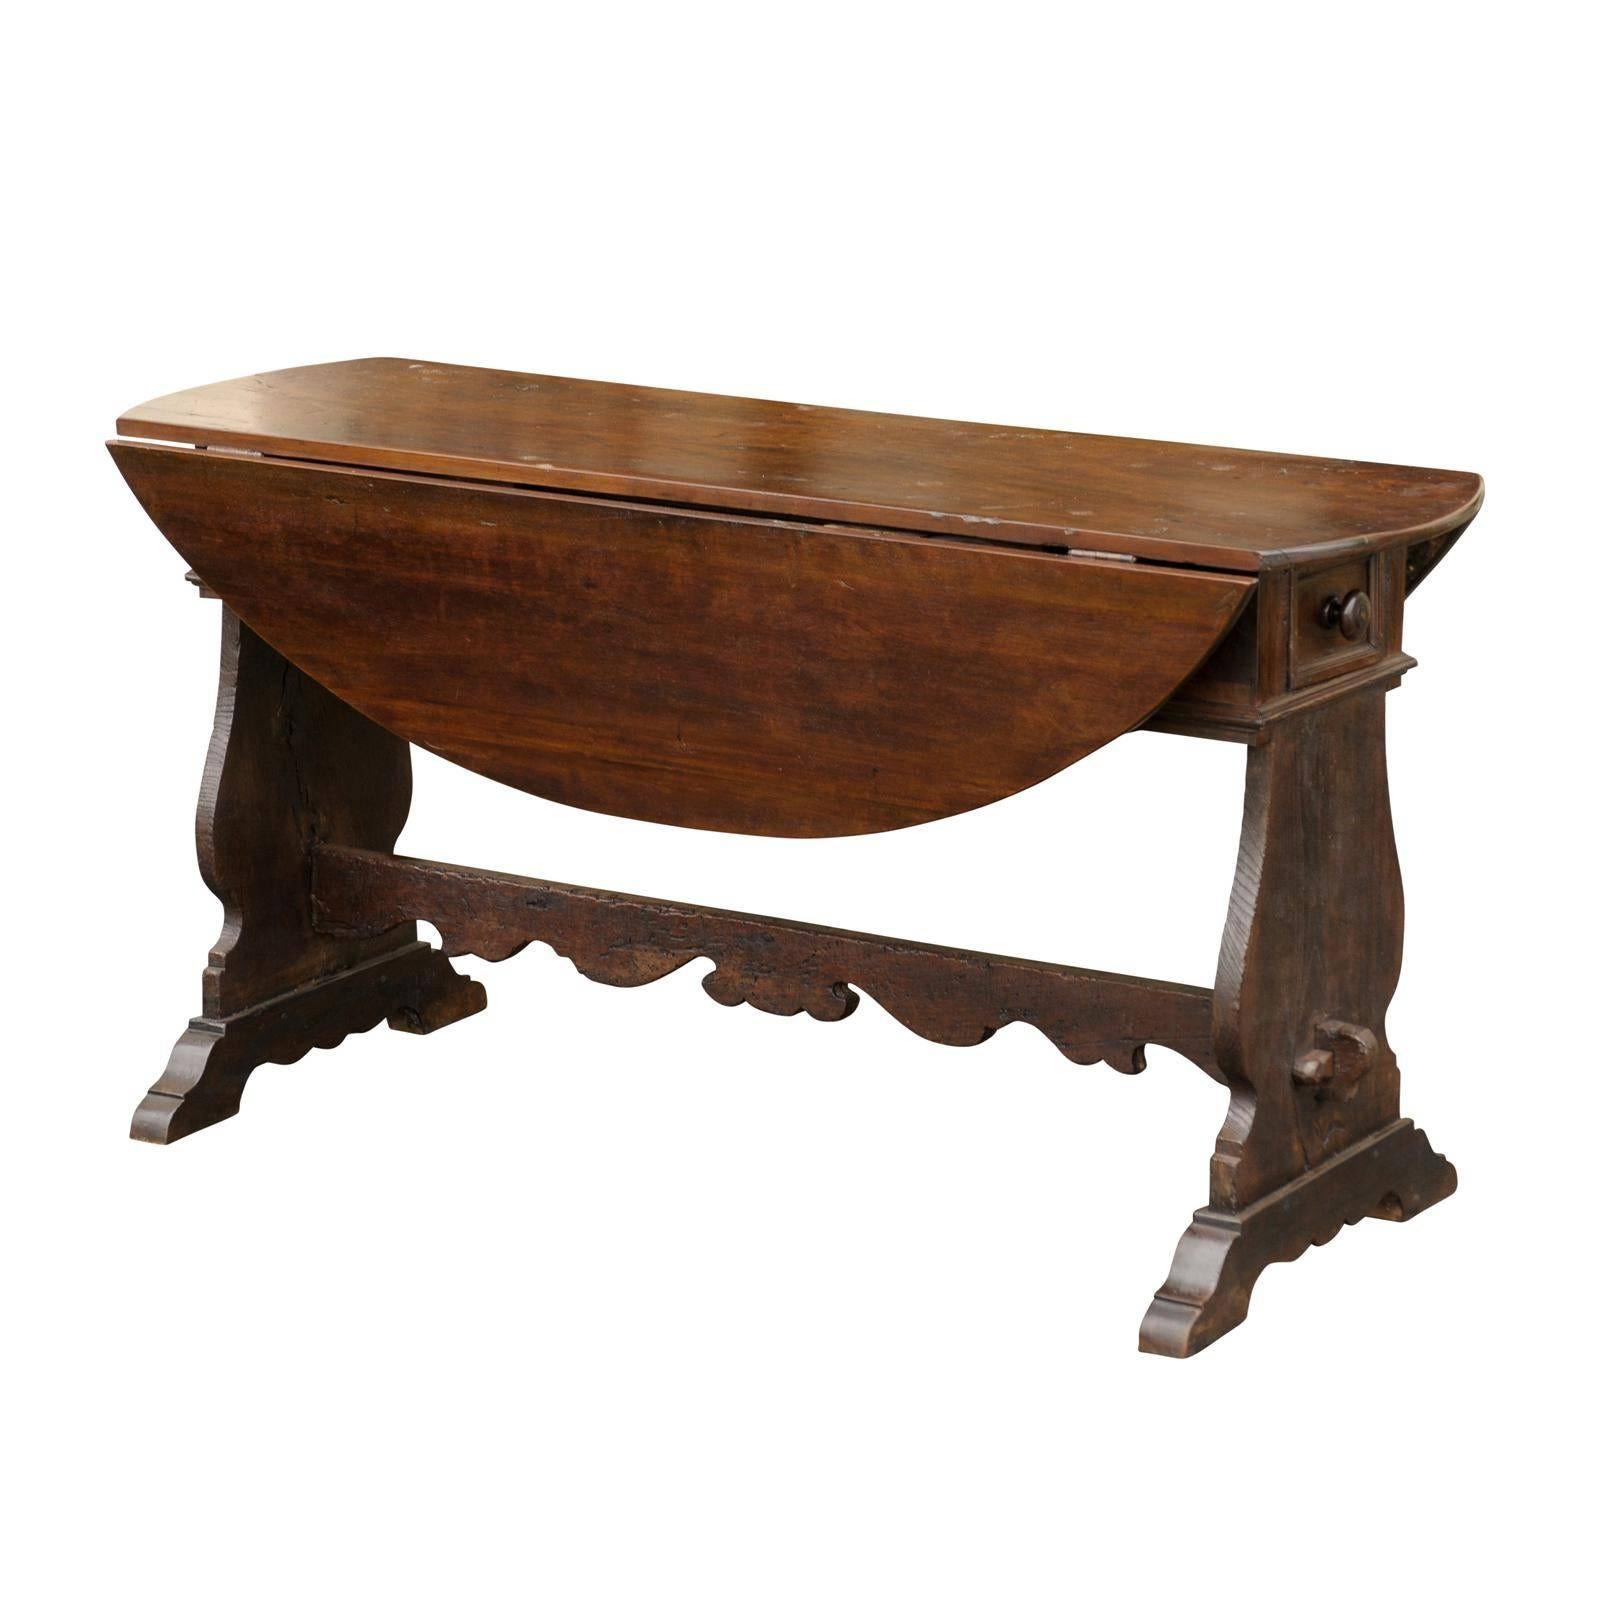 Oval Italian Walnut Drop-Leaf Table from the Late 18th Century with Trestle Base